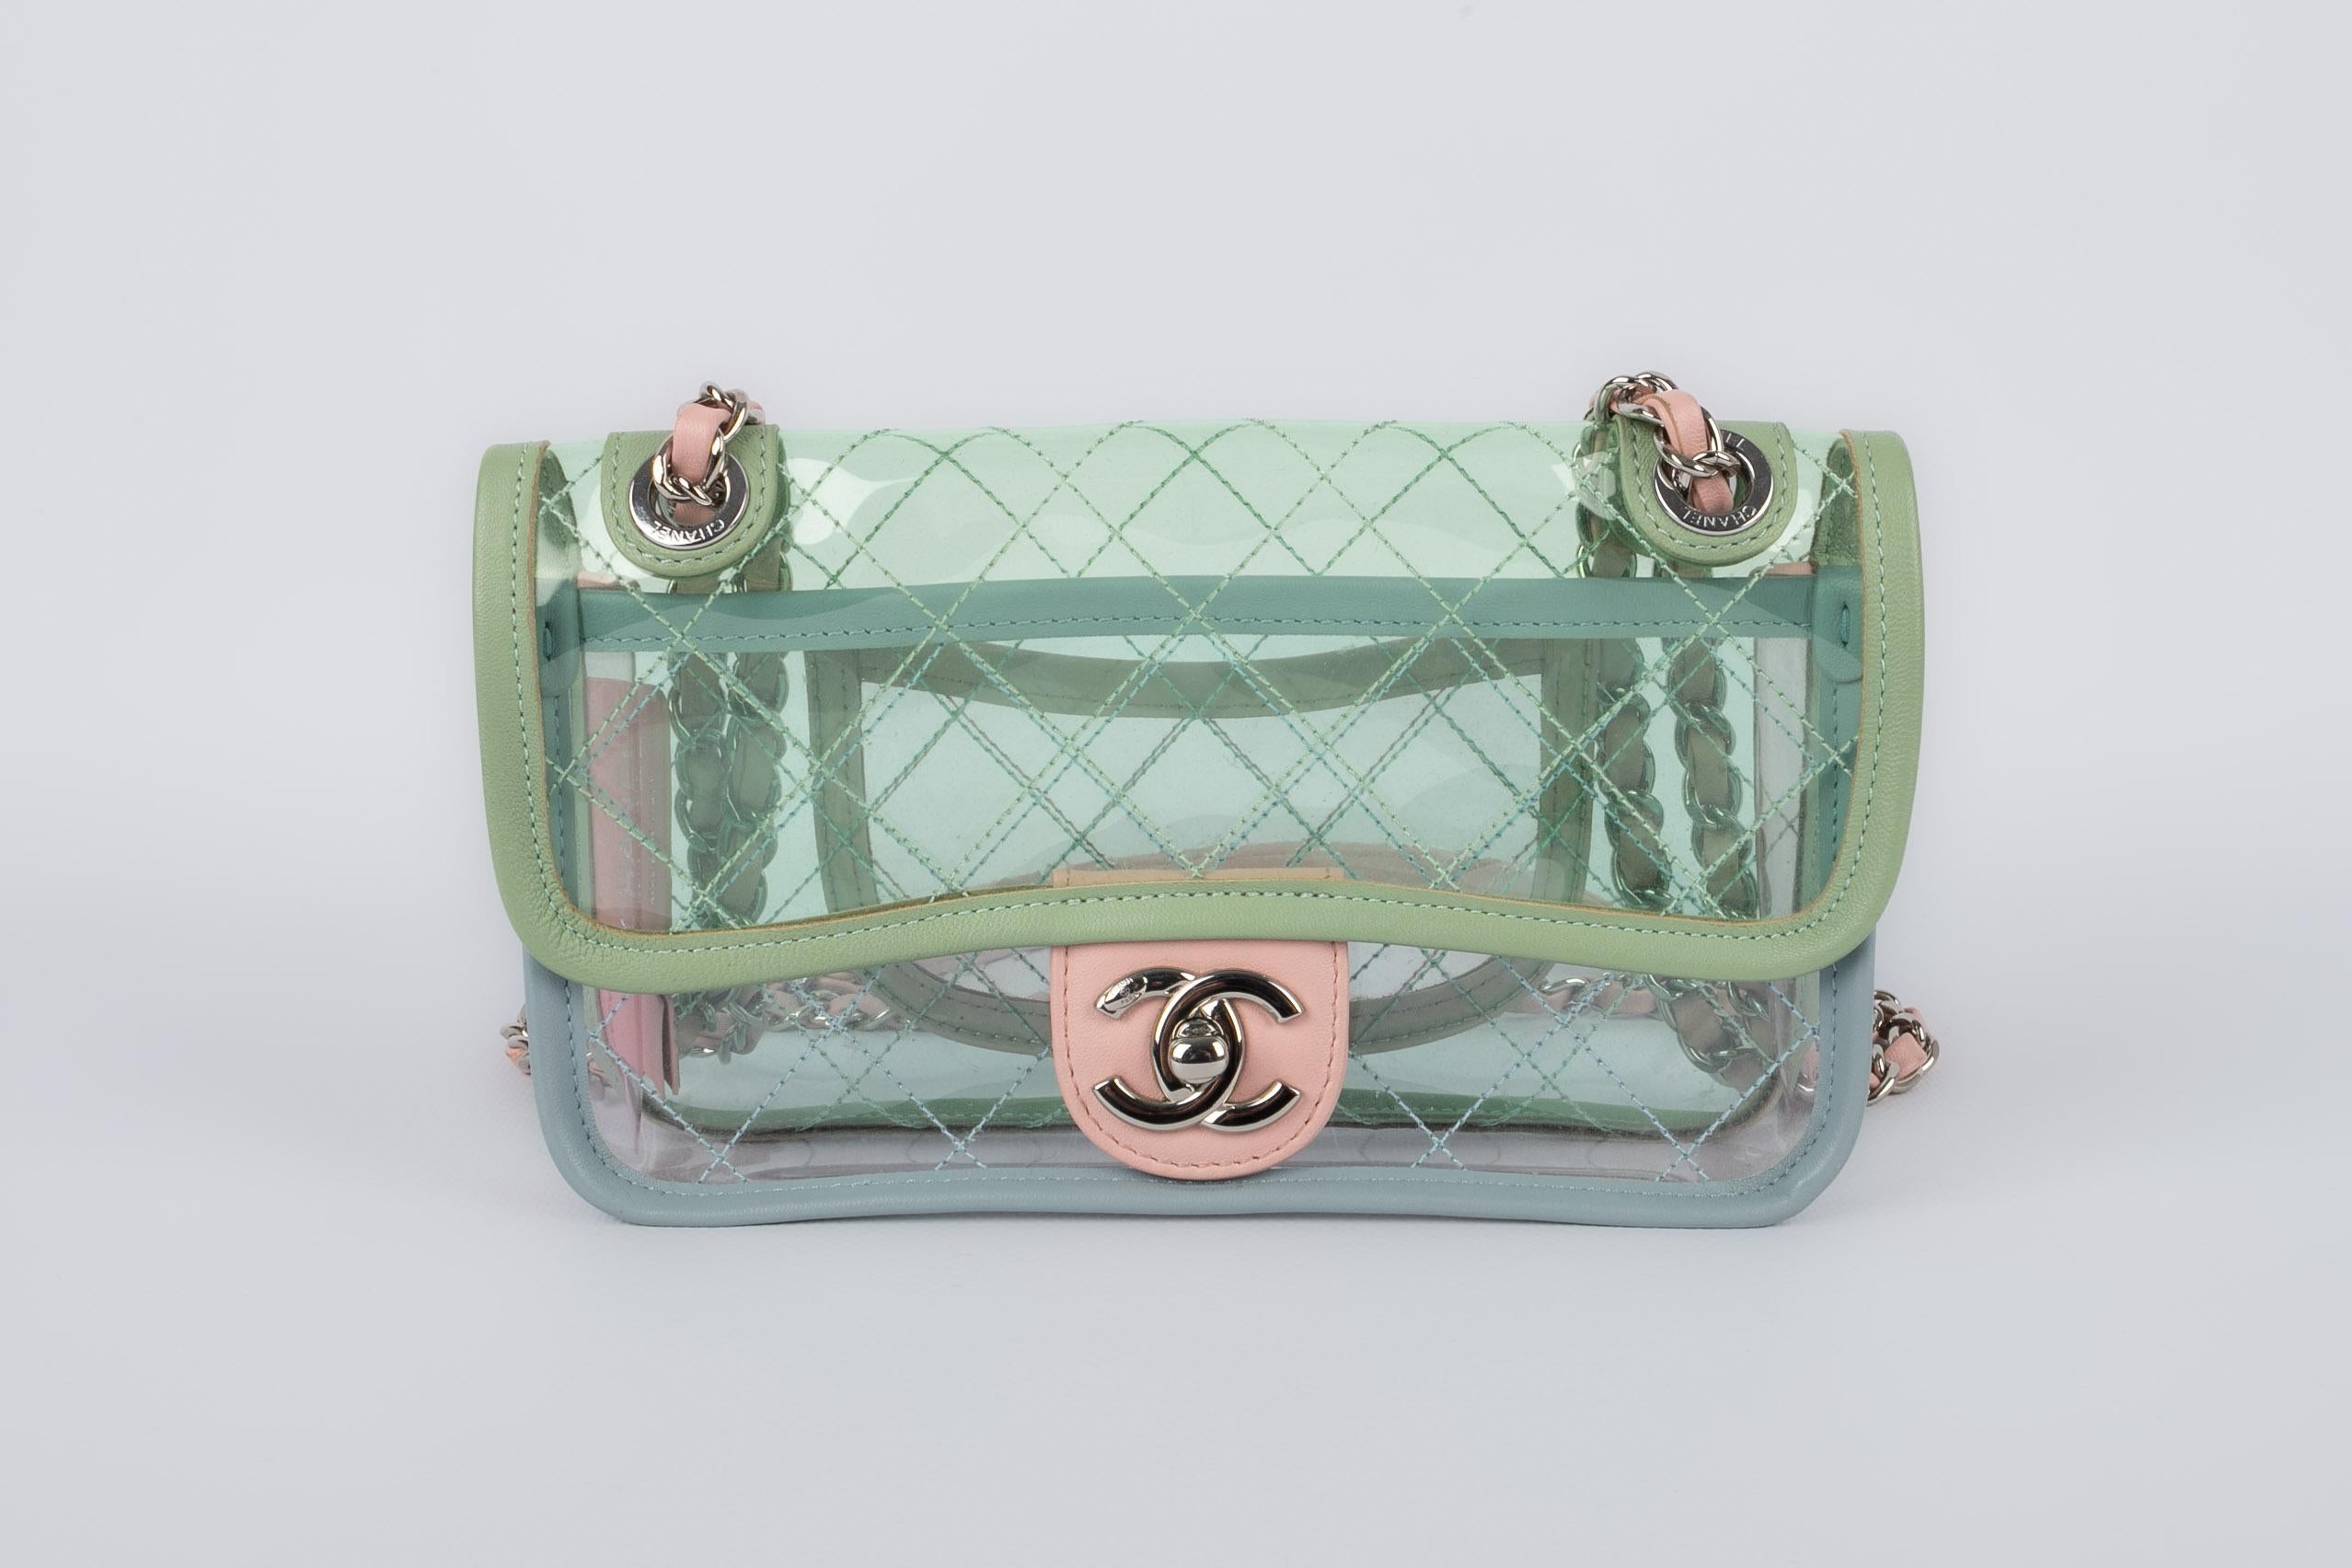 CHANEL - Transparent PVC bag with multicolored leather and silvery metal elements. 2018 Spring-Summer Collection.

Condition:
Very good condition

Dimensions:
Length: 20 cm - Height: 13 cm - Depth: 3 cm - Handle length: 129 cm

S22